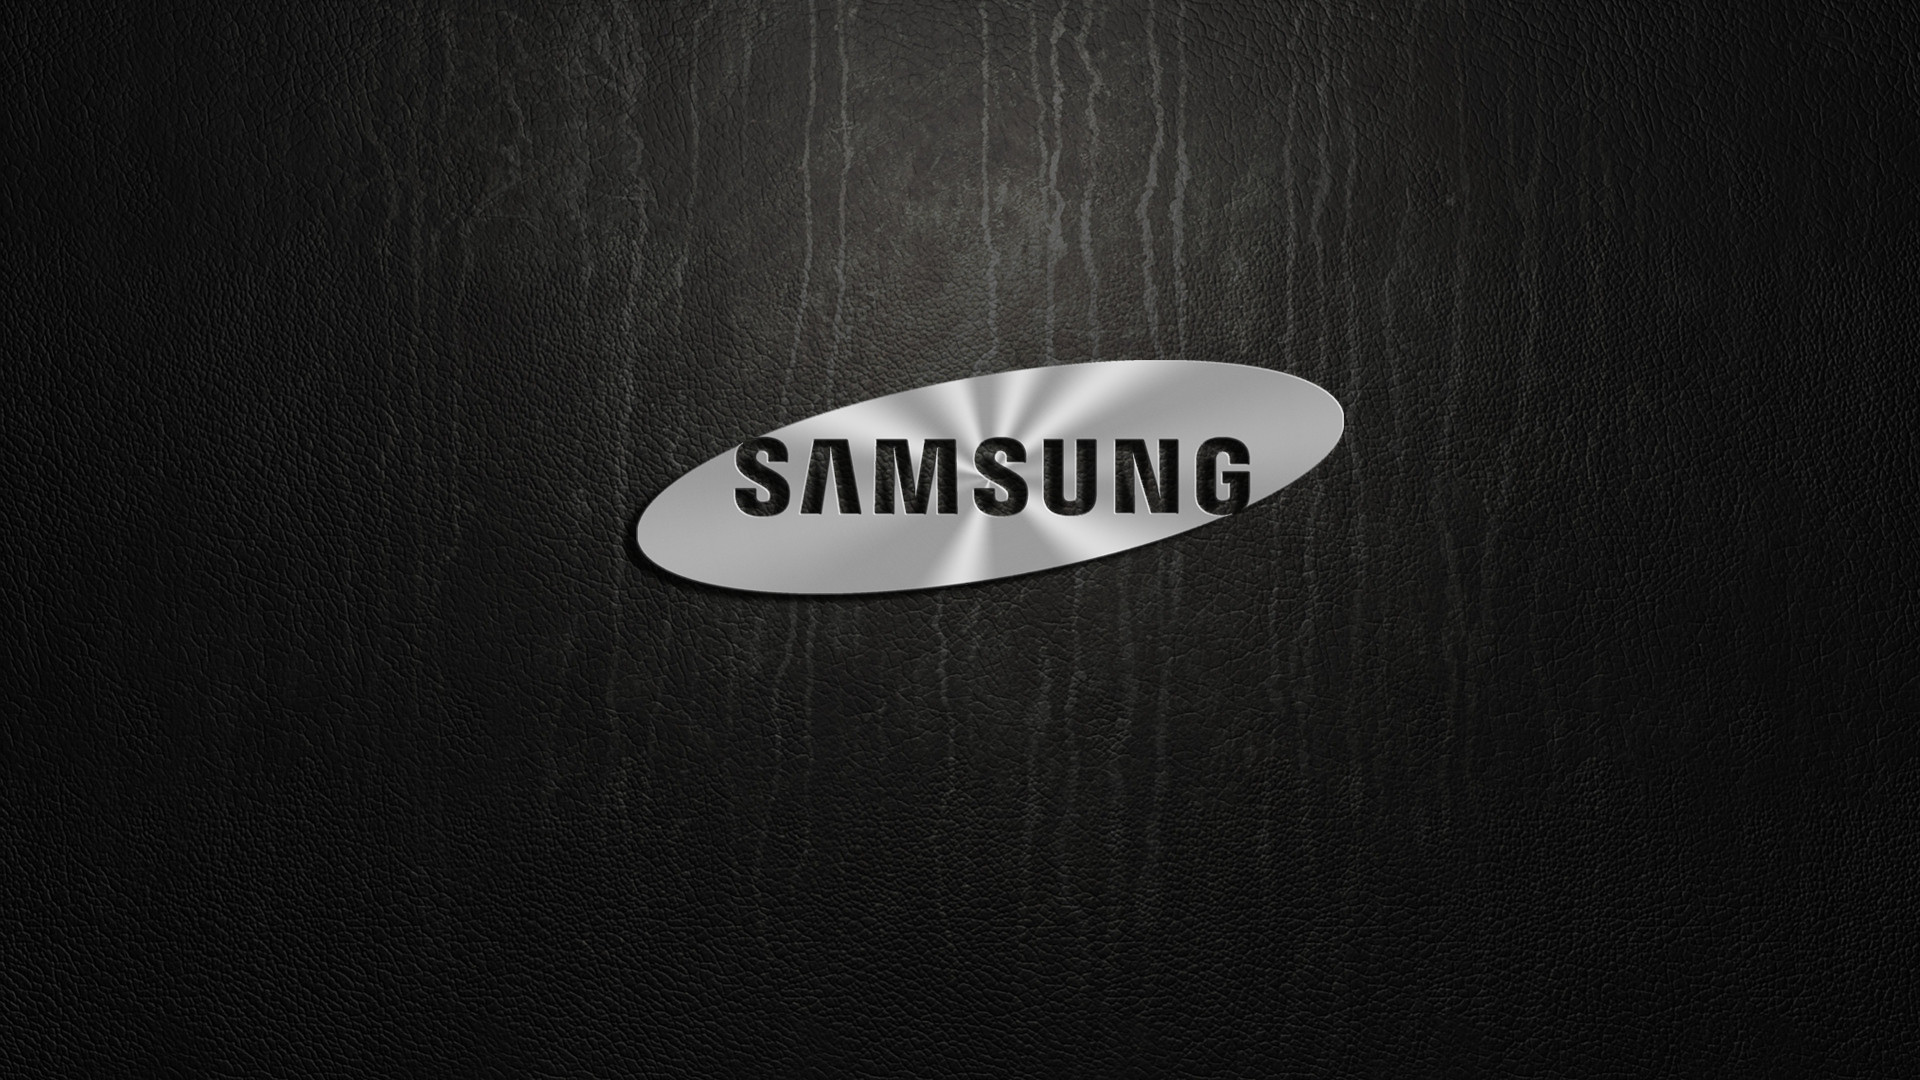 Free download 80 Samsung Logo Wallpapers on WallpaperPlay [1920x1080